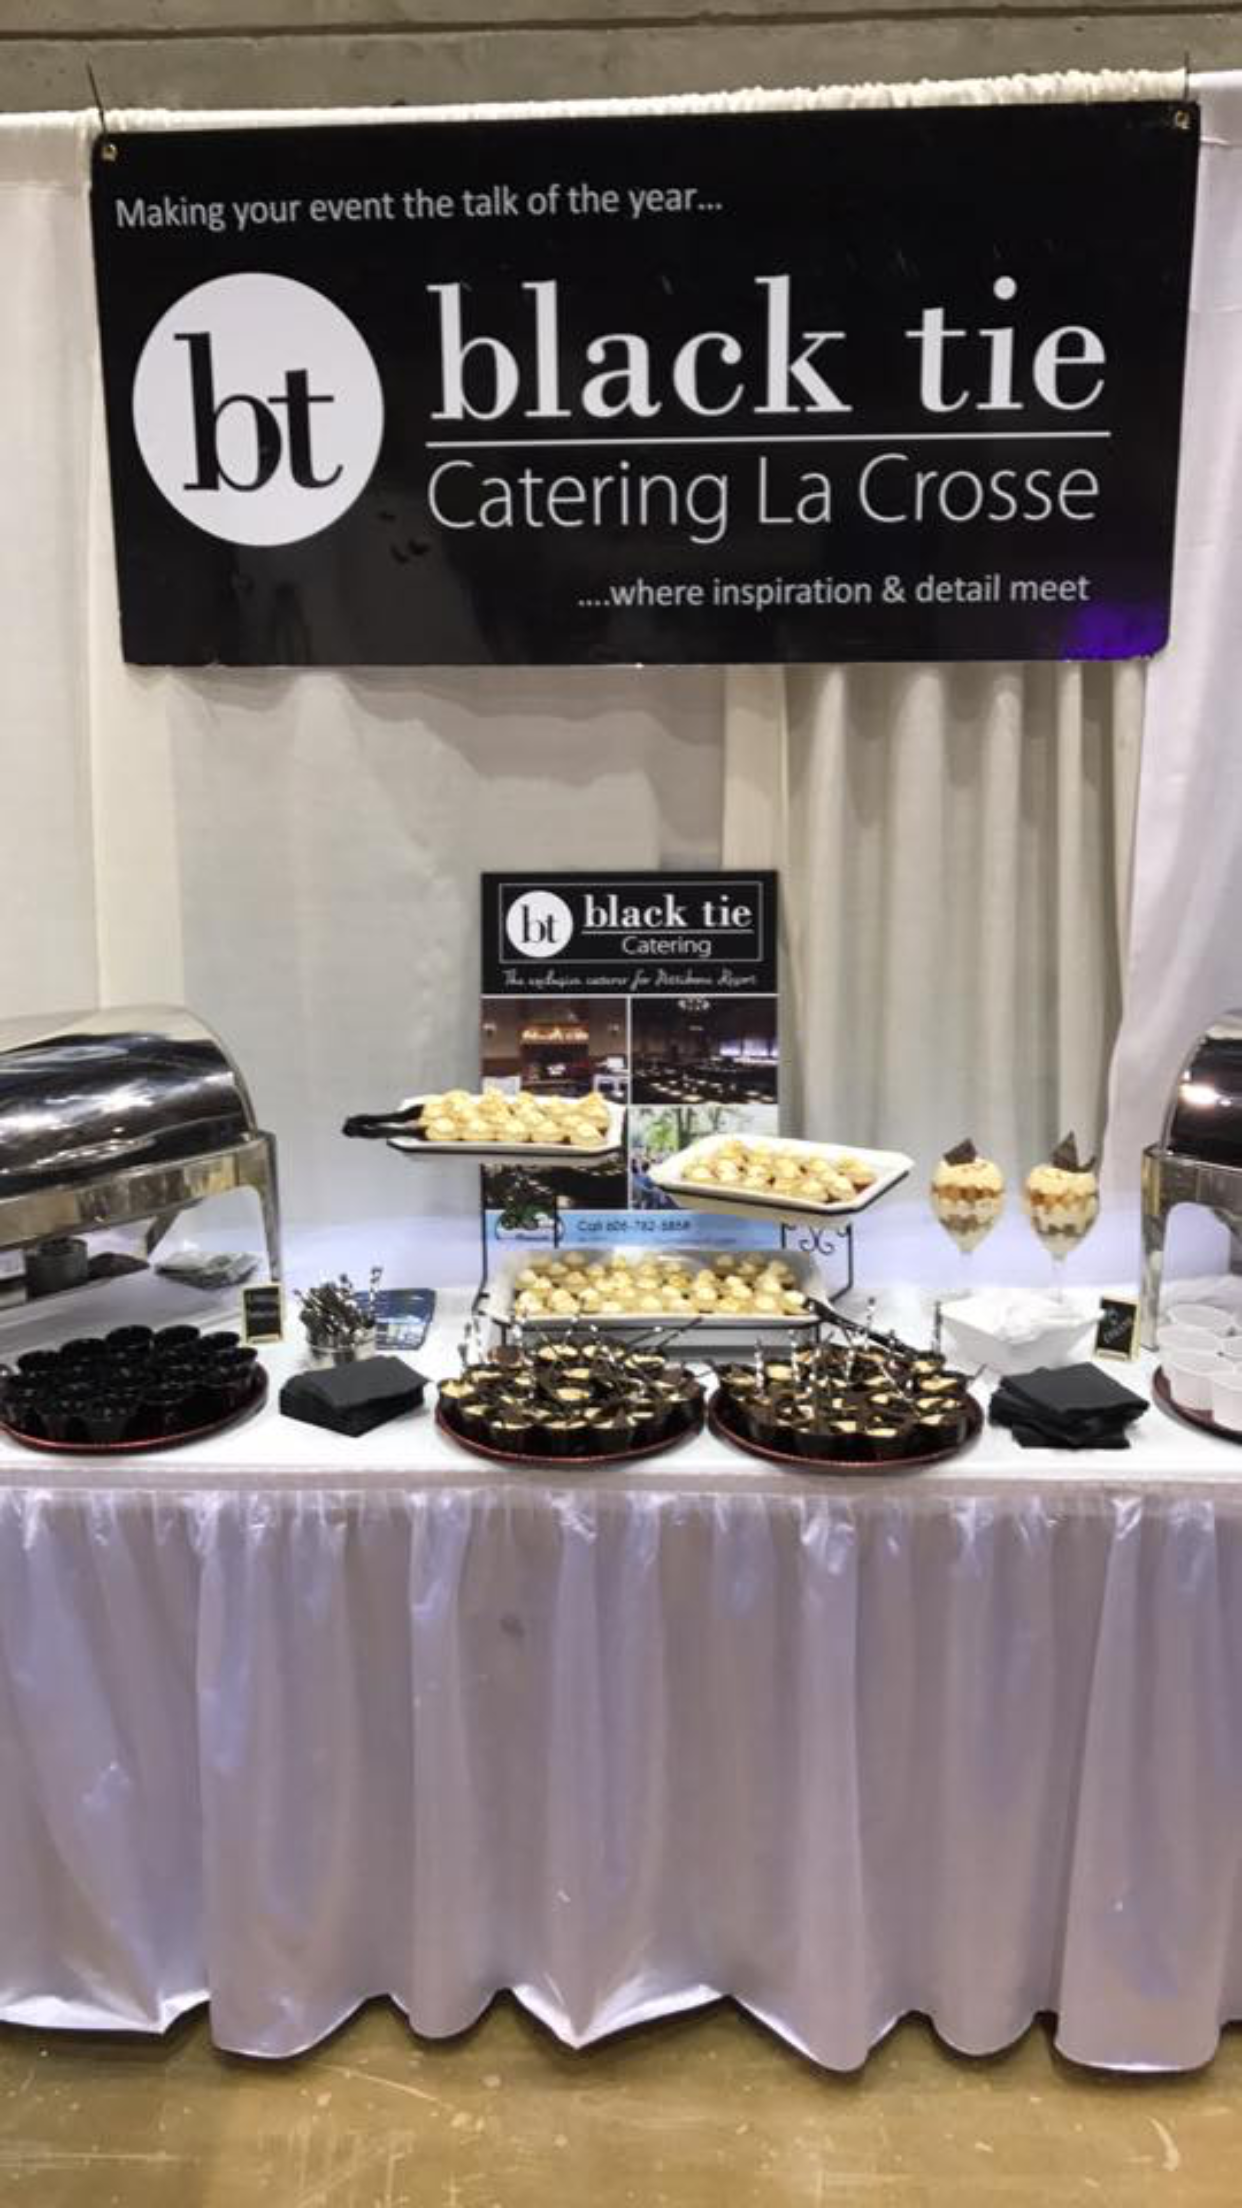 Black Tie Catering booth on display at the La Crosse 2017 Wedding Expo